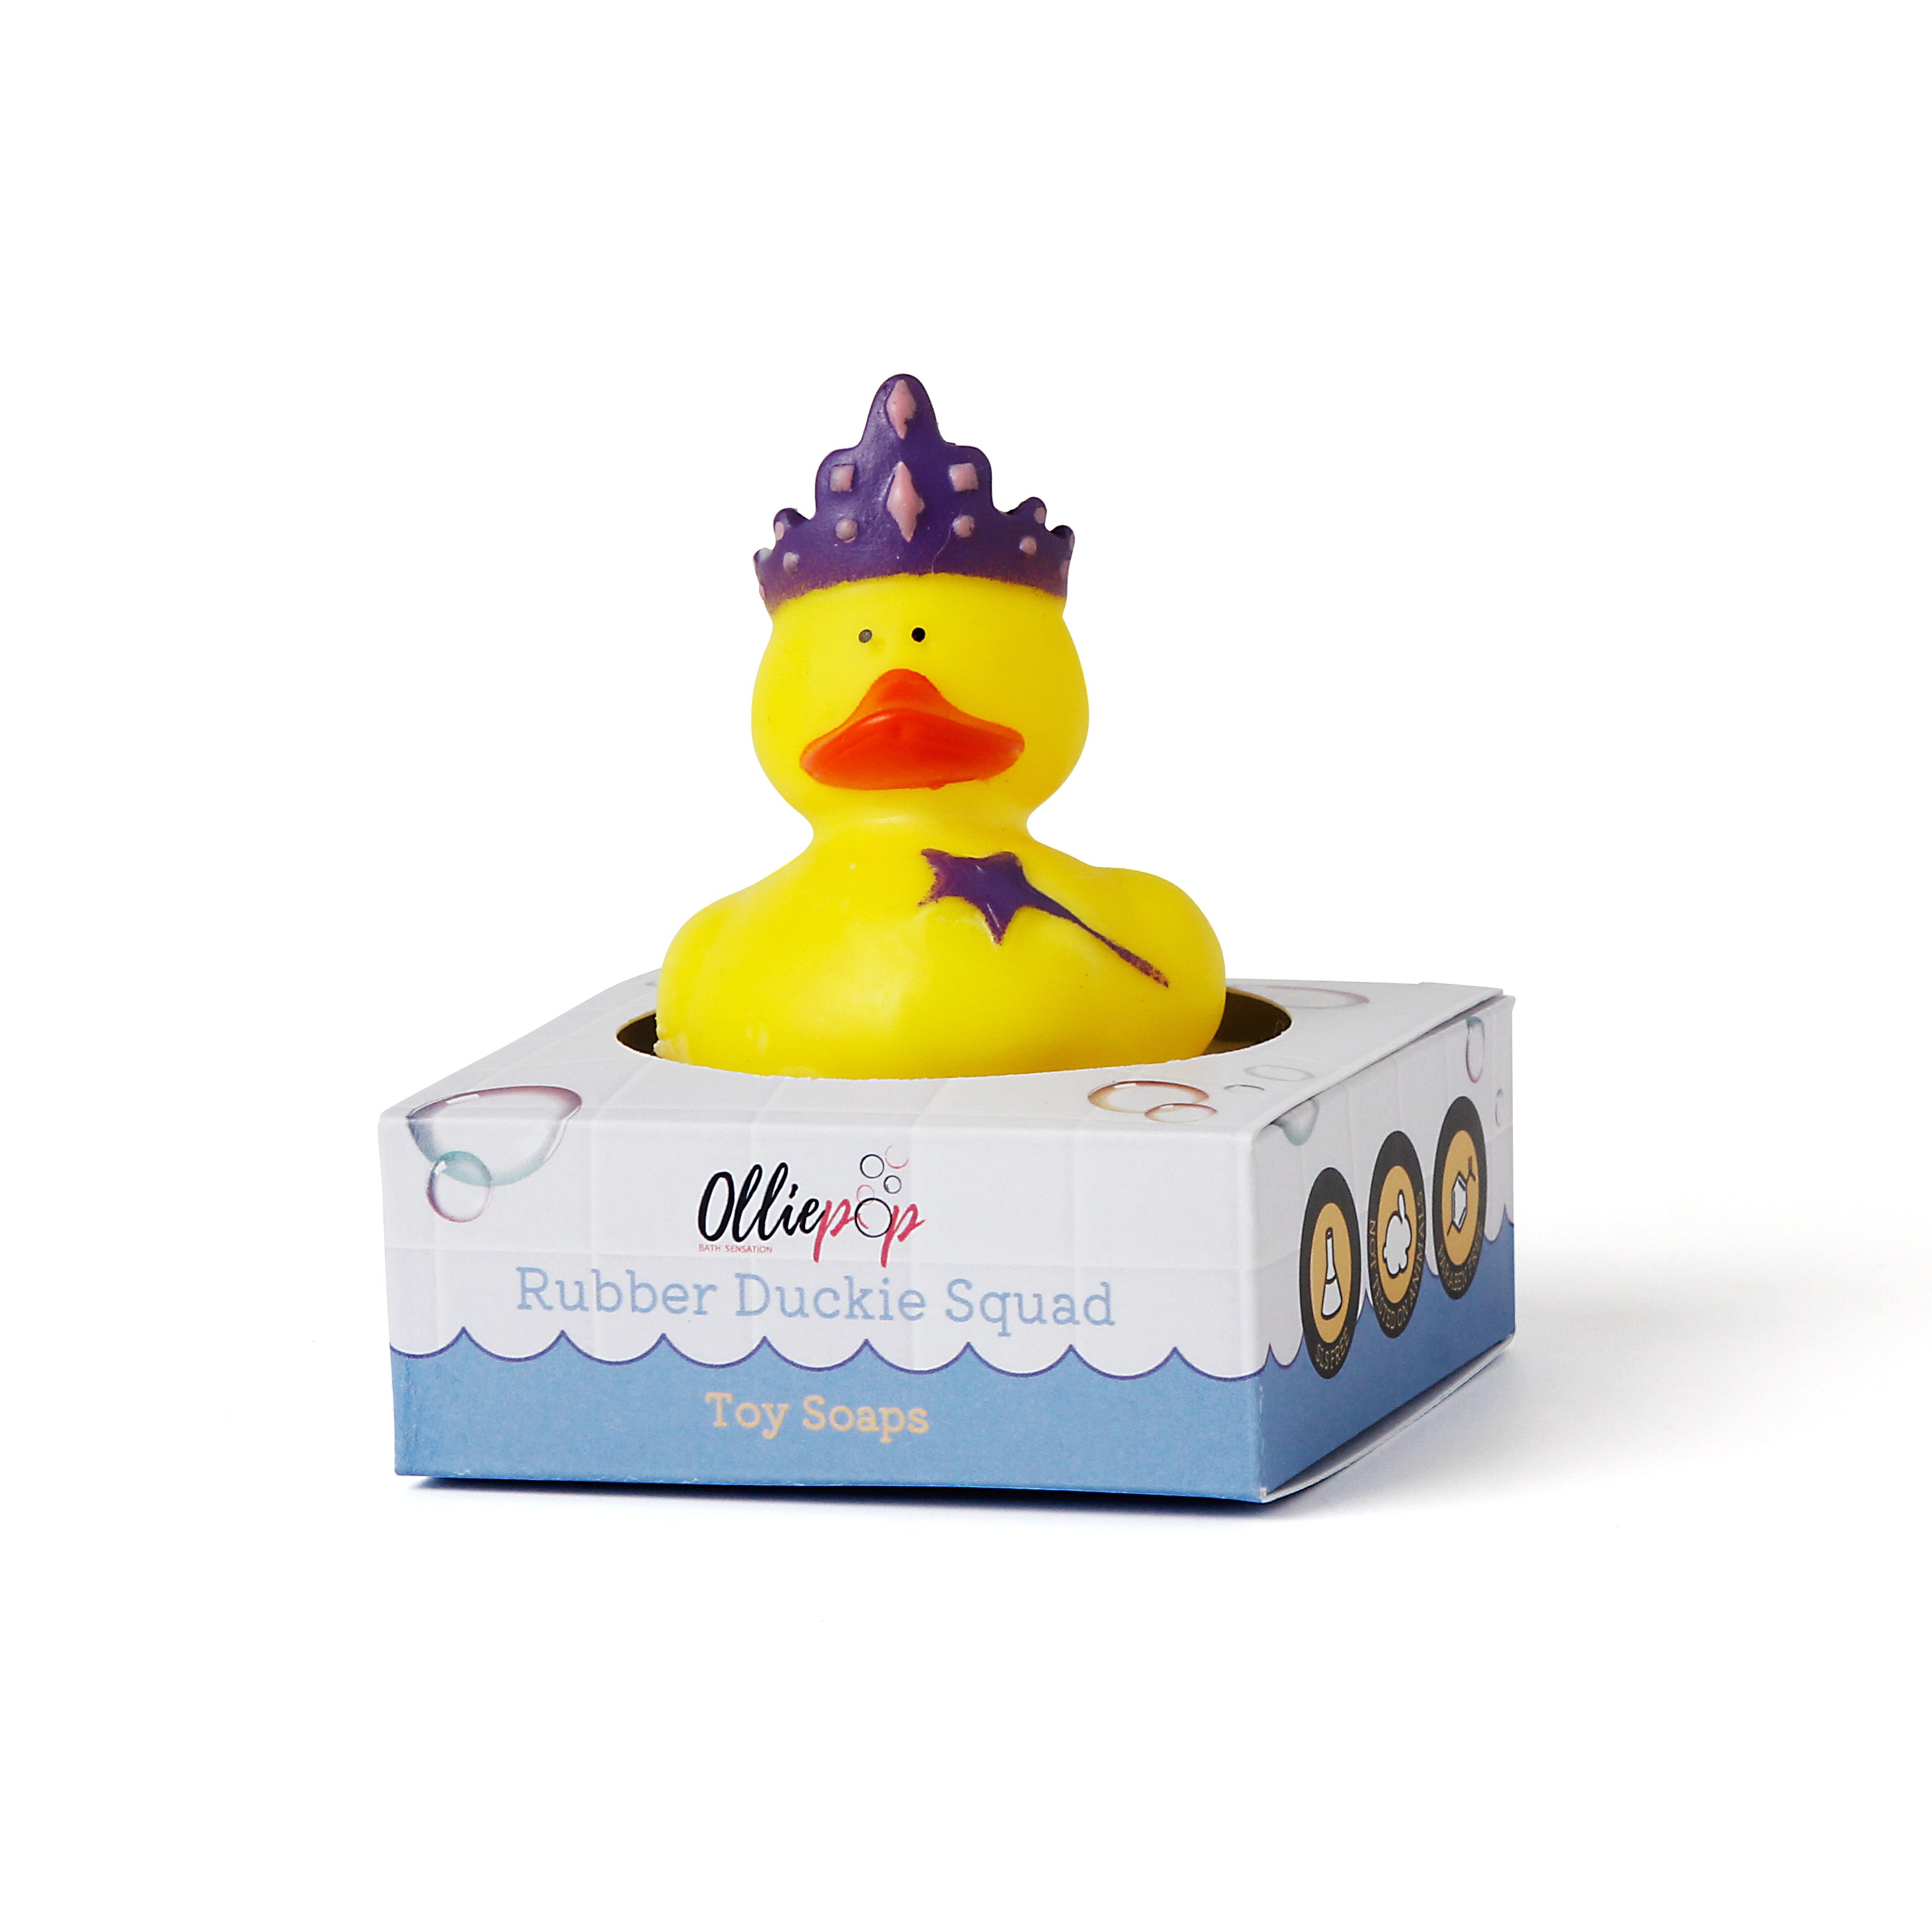 Yellow rubber duckie soap with a crown and magic wand. Packaged in our customized Olliepop packaging.